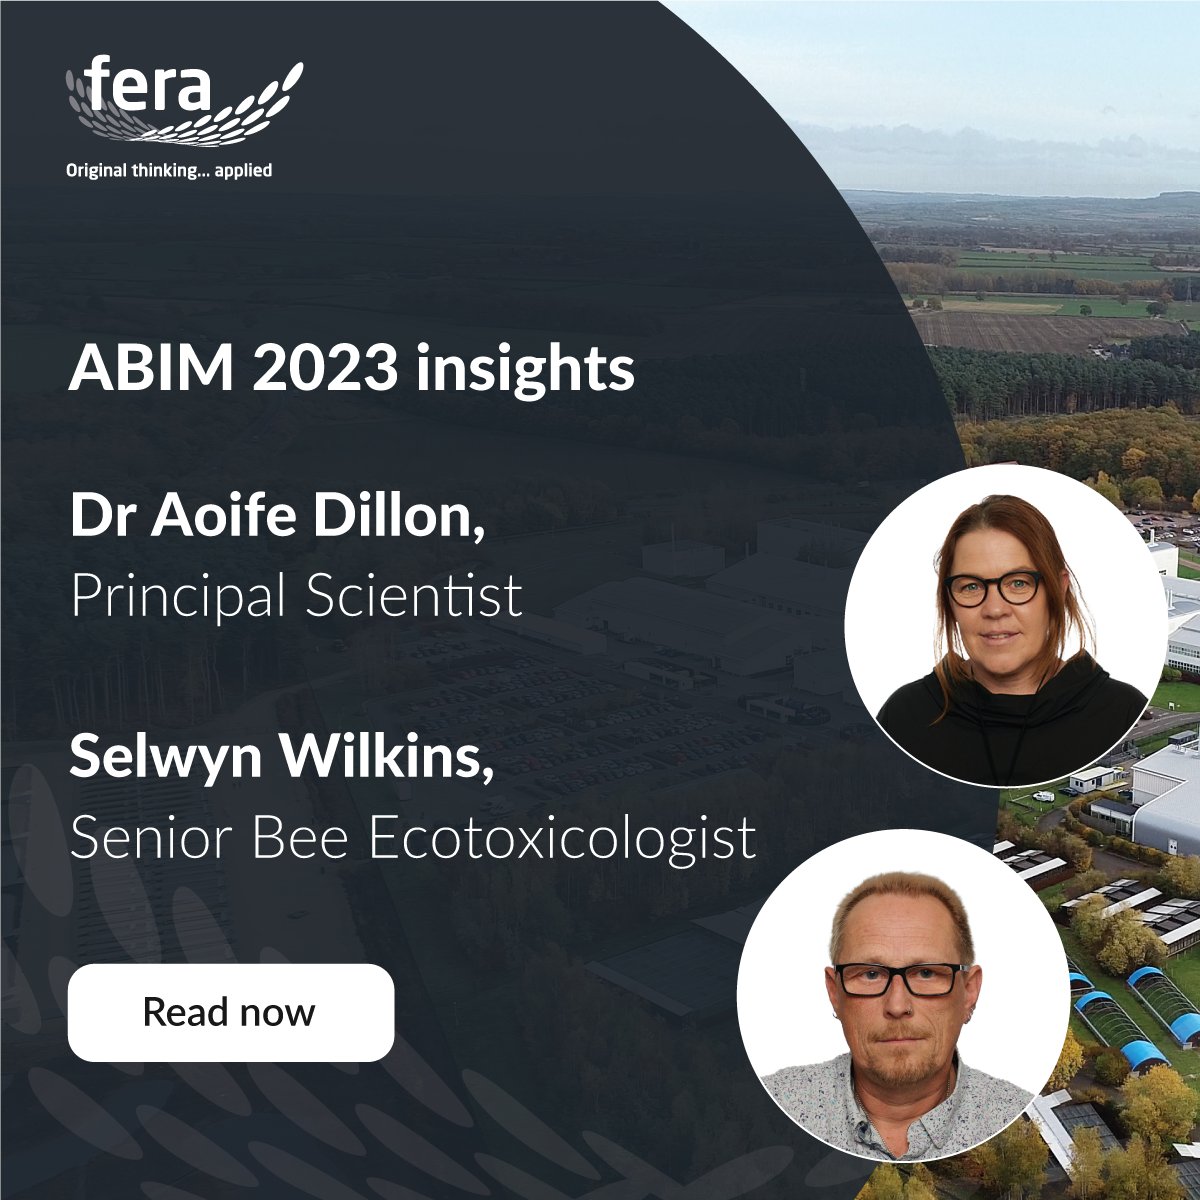 ABIM 2023 insights from Dr Aoife Dillon, Principal Scientist - Crop Protection and Selwyn Wilkins, Senior Bee Ecotoxicologist. Read more ➡ hubs.ly/Q029Y15M0 🔬 Find out more about our biopesticides services hubs.ly/Q029Ygx10 #biopesticides #abim2023 #FeraScience